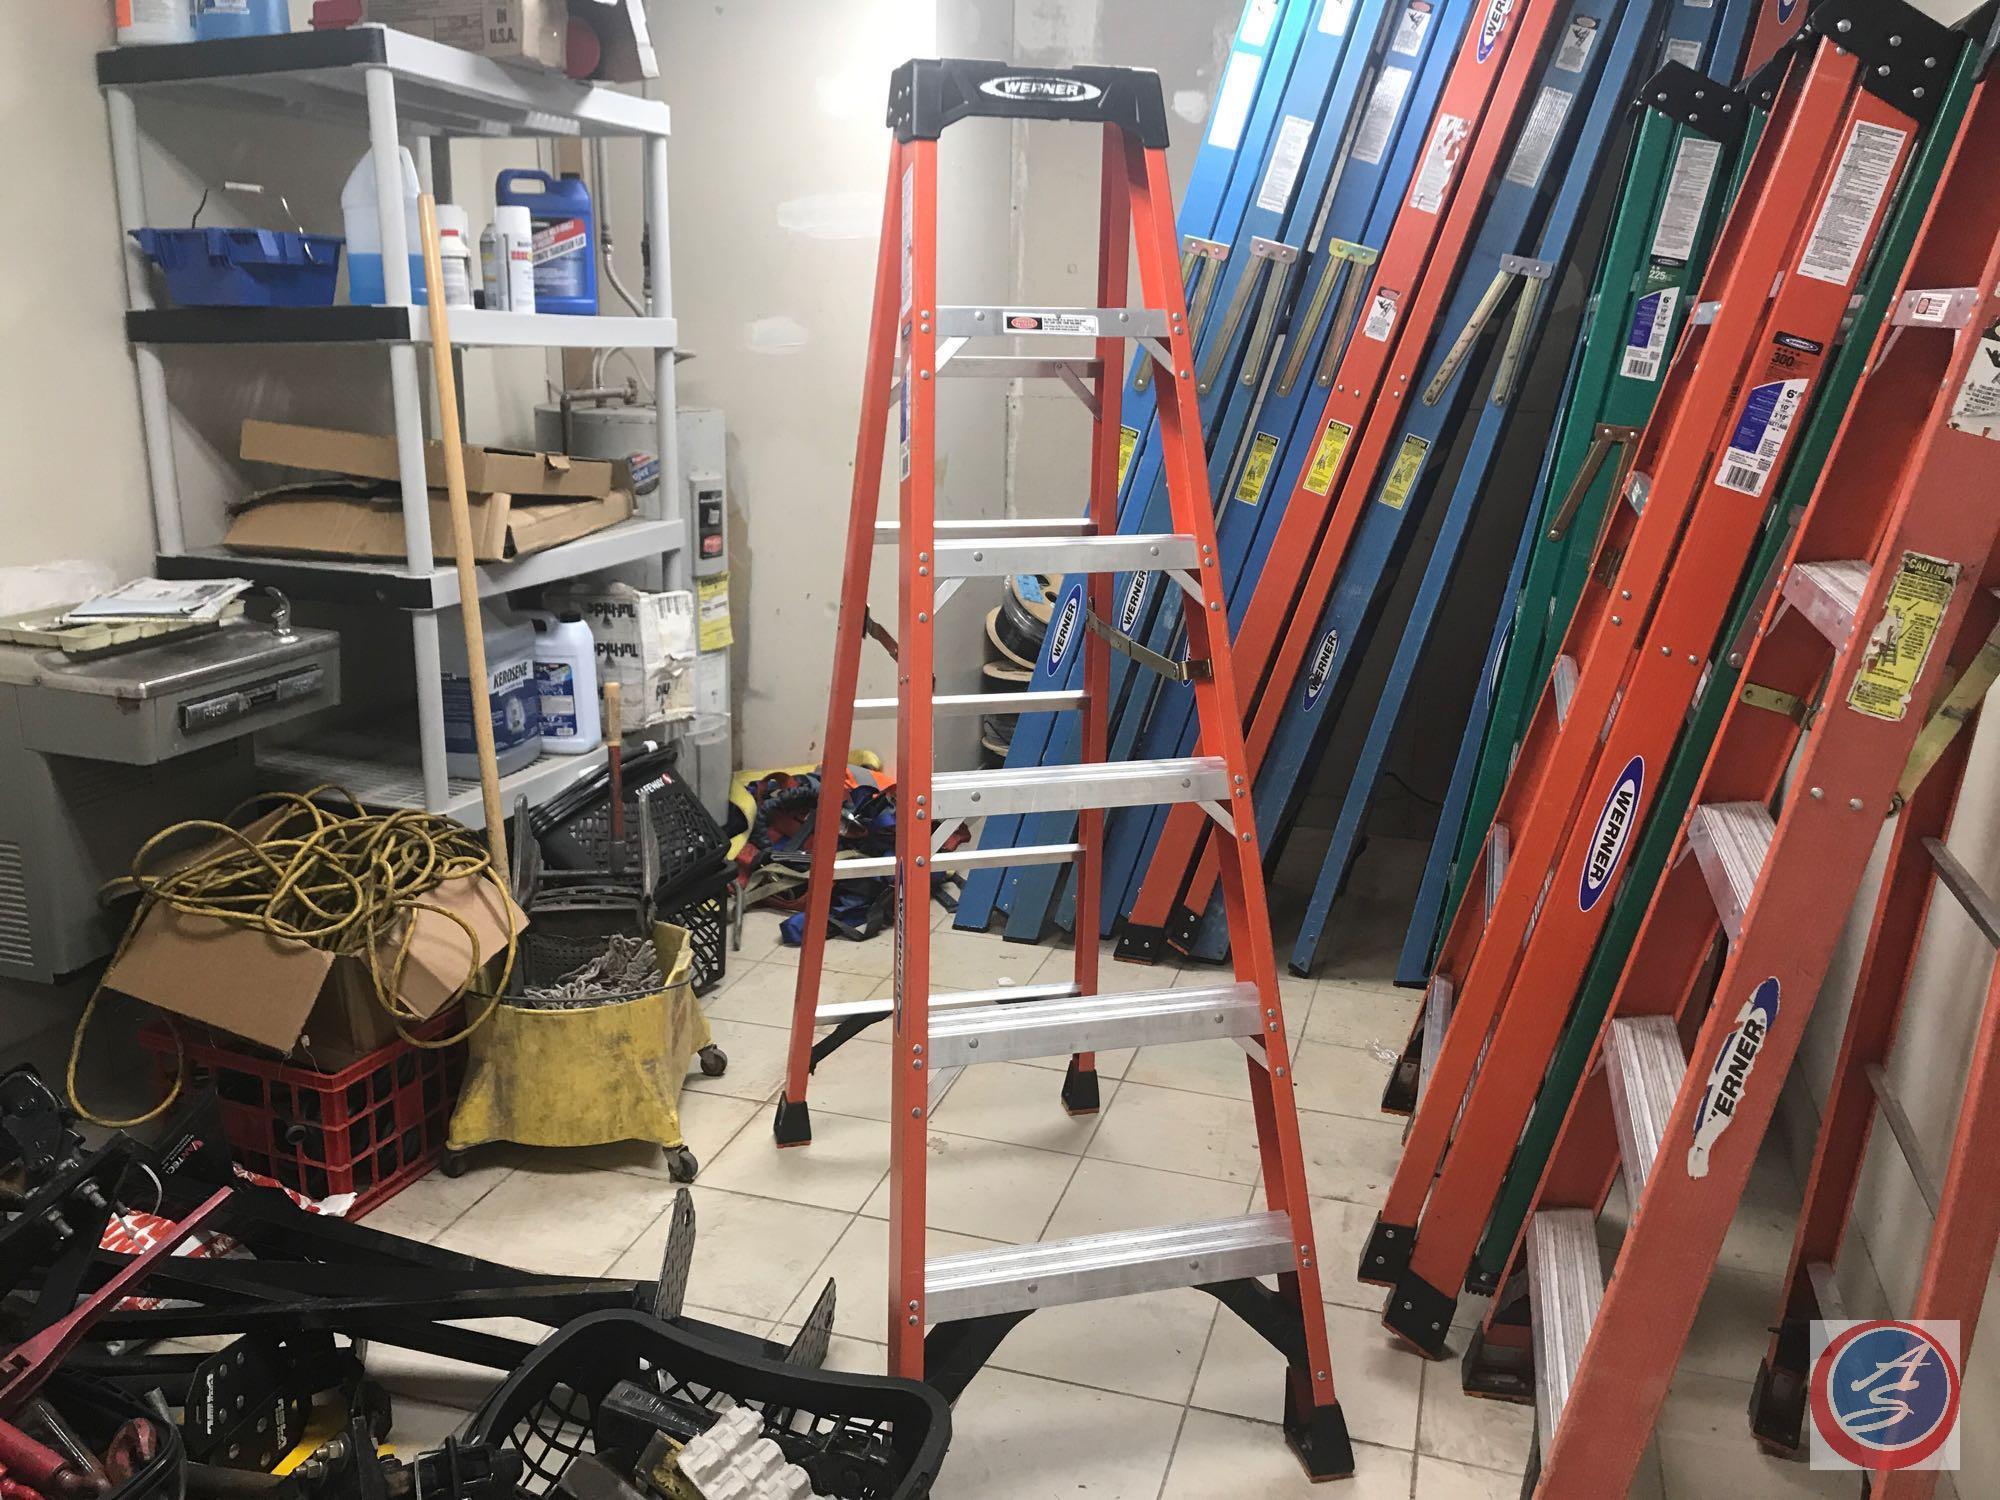 {{TIMES THE MONEY}} (5) Werner 6 foot step ladders, 300 pound weight limit